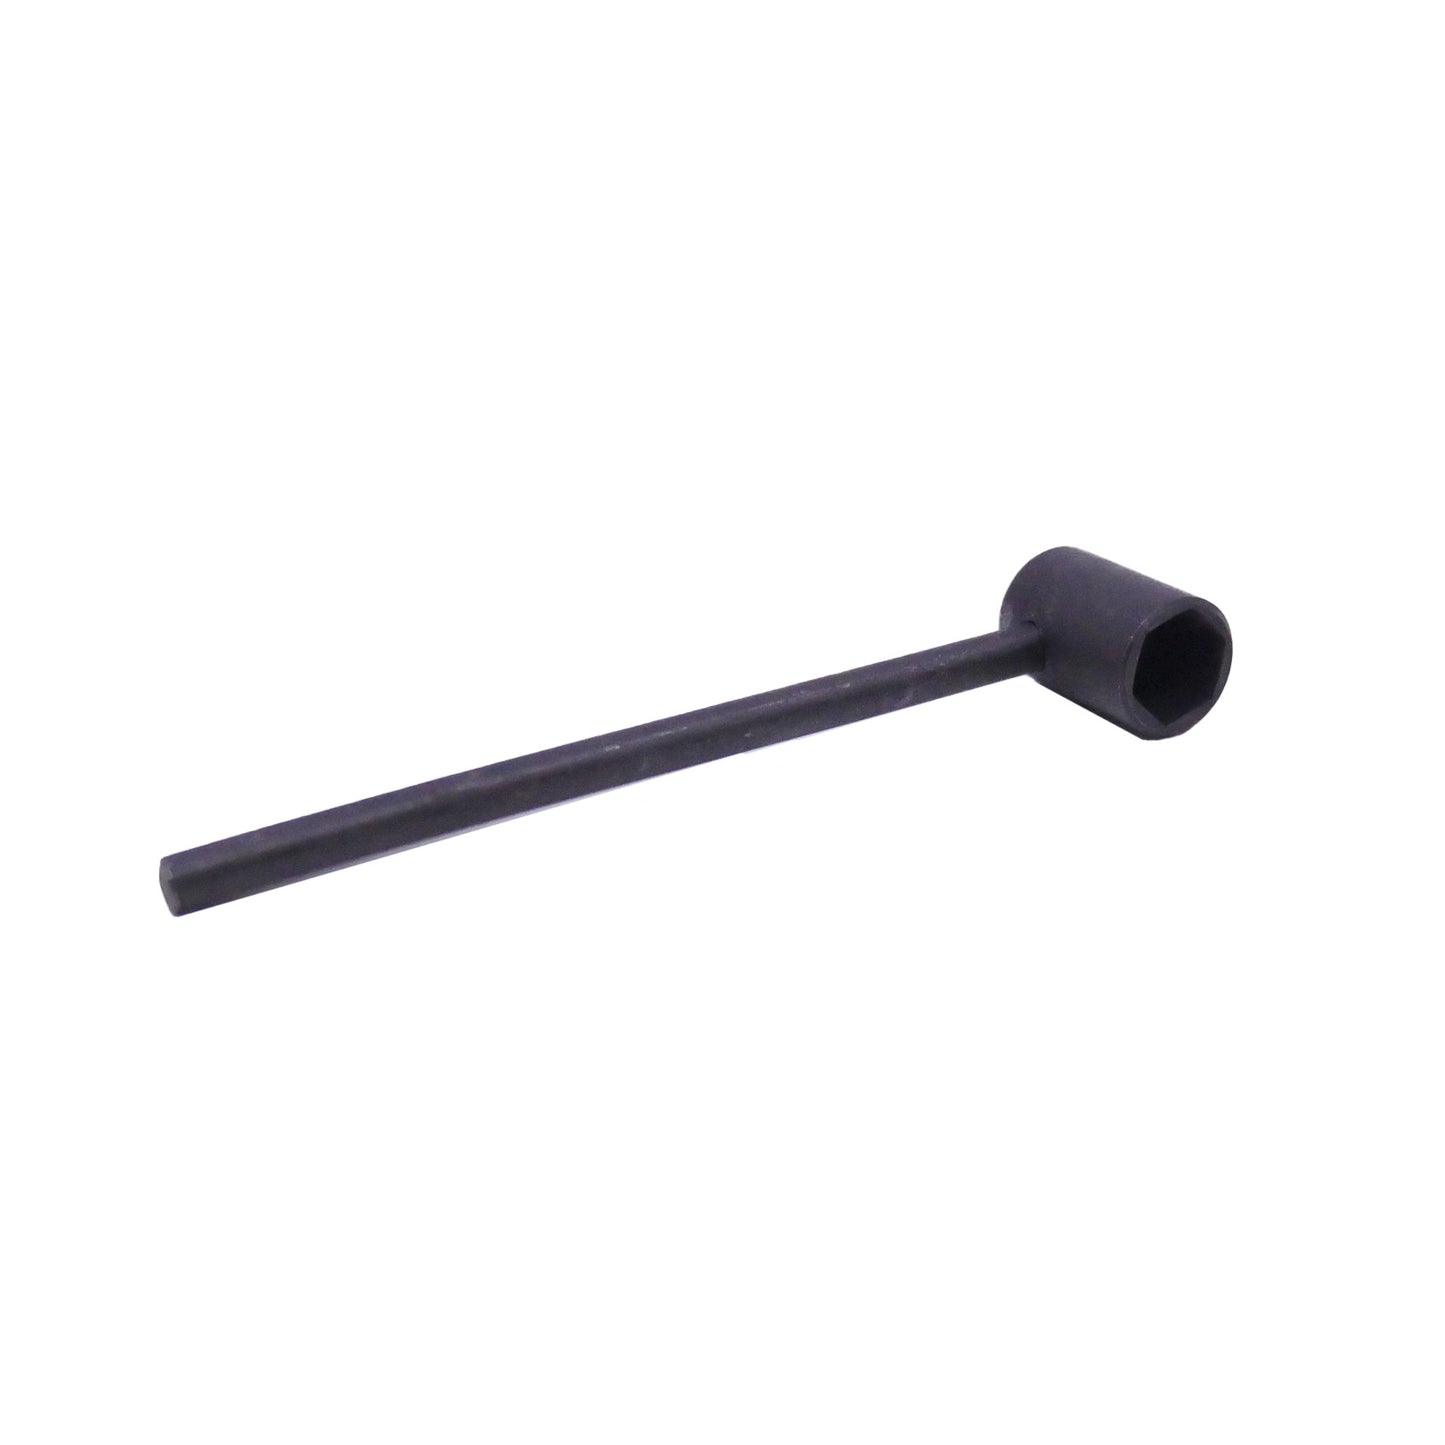 5/16" Truss Rod Wrench (S5G4)